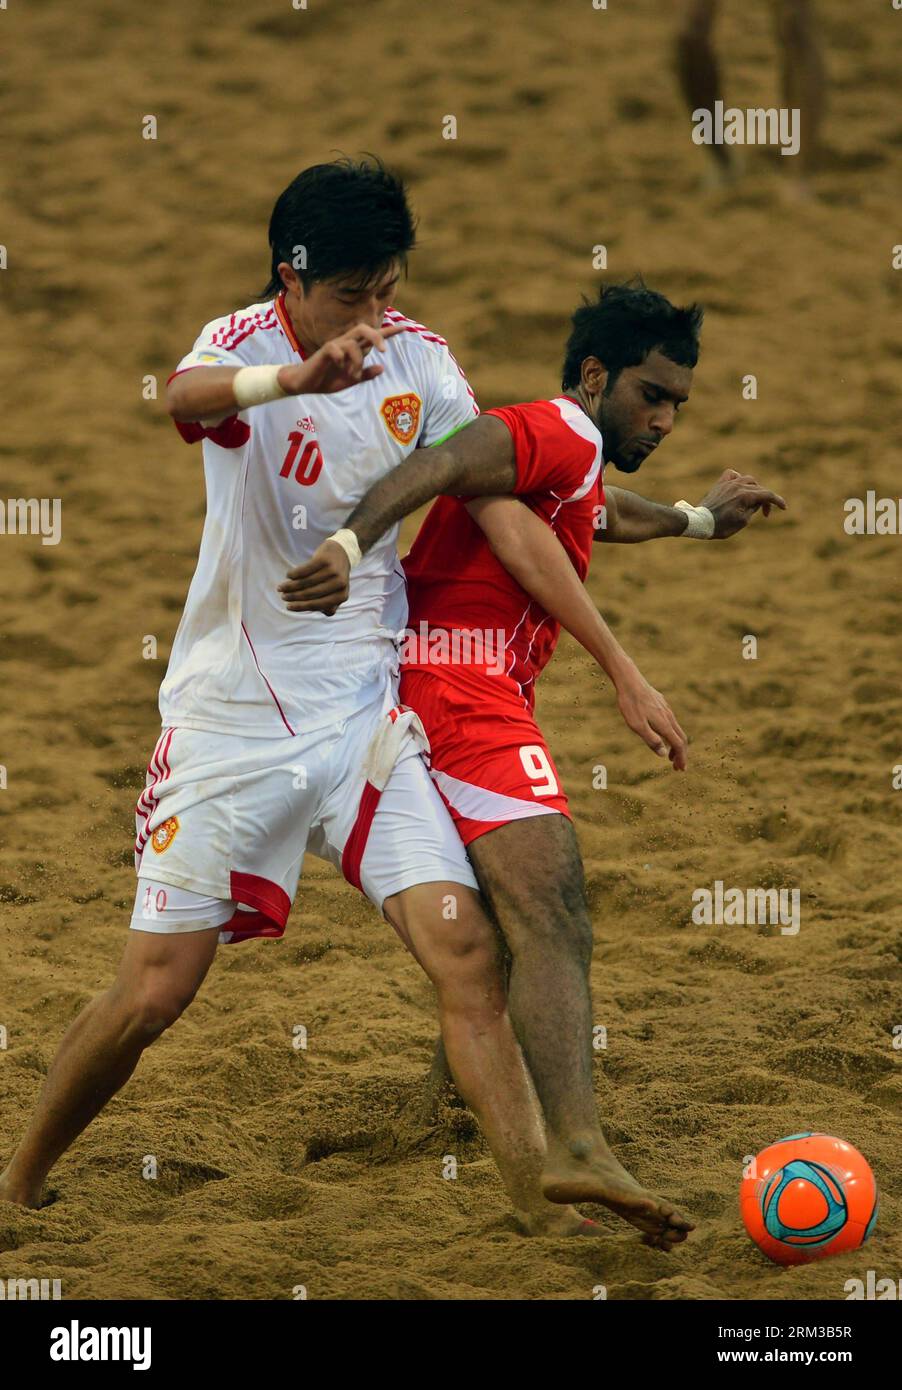 Bildnummer: 60123014  Datum: 14.07.2013  Copyright: imago/Xinhua (130714) -- HAIYANG, July 14, 2013 (Xinhua) -- Kamal Ali Sulaiman (R) of the United Arab Emirates vies for the ball during the final between the United Arab Emirates and China at the 2013 Asian Beach Soccer Cup held in Haiyang, a coastal city of east China s Shandong province, July 14, 2013. The United Arab Emirates lost 3-4. (Xinhua/Zhu Zheng) (SP)CHINA-HAIYANG-ASIAN BEACH SOCCER CUP-FINAL (CN) PUBLICATIONxNOTxINxCHN Nationalteam Vereinigte Arabische Emirate Länderspiel x0x xsk 2013 hoch      60123014 Date 14 07 2013 Copyright I Stock Photo